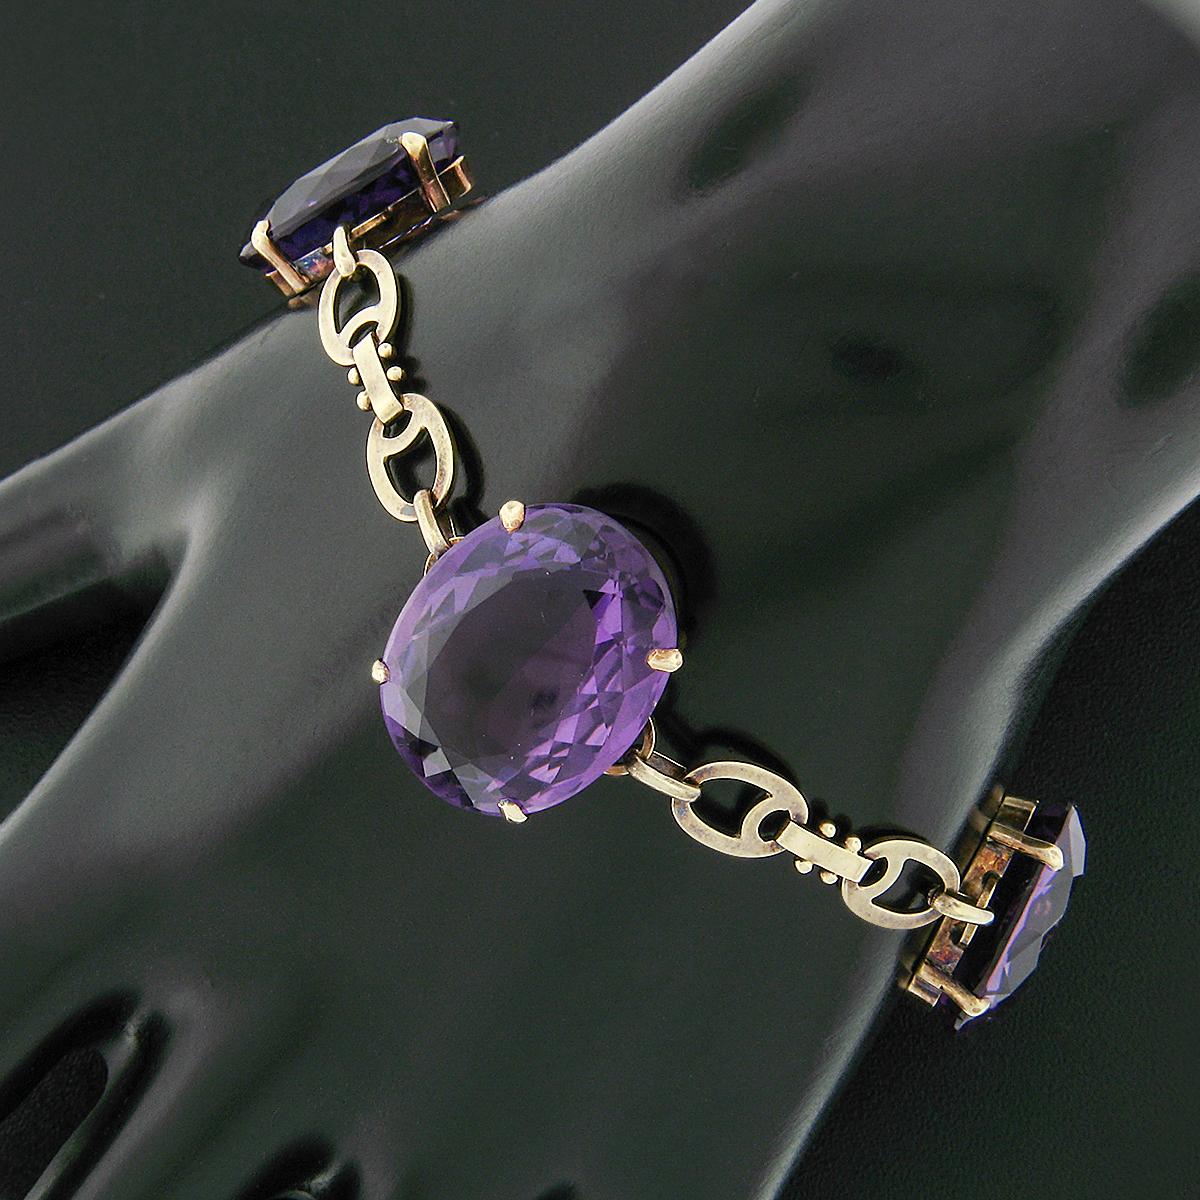 This outstanding antique amethyst bracelet was crafted from solid 14k yellow gold during the Victorian era. It features 3 large oval cut natural amethysts totaling approximately 37.08 carats in weight which display a magnificent and well-matched